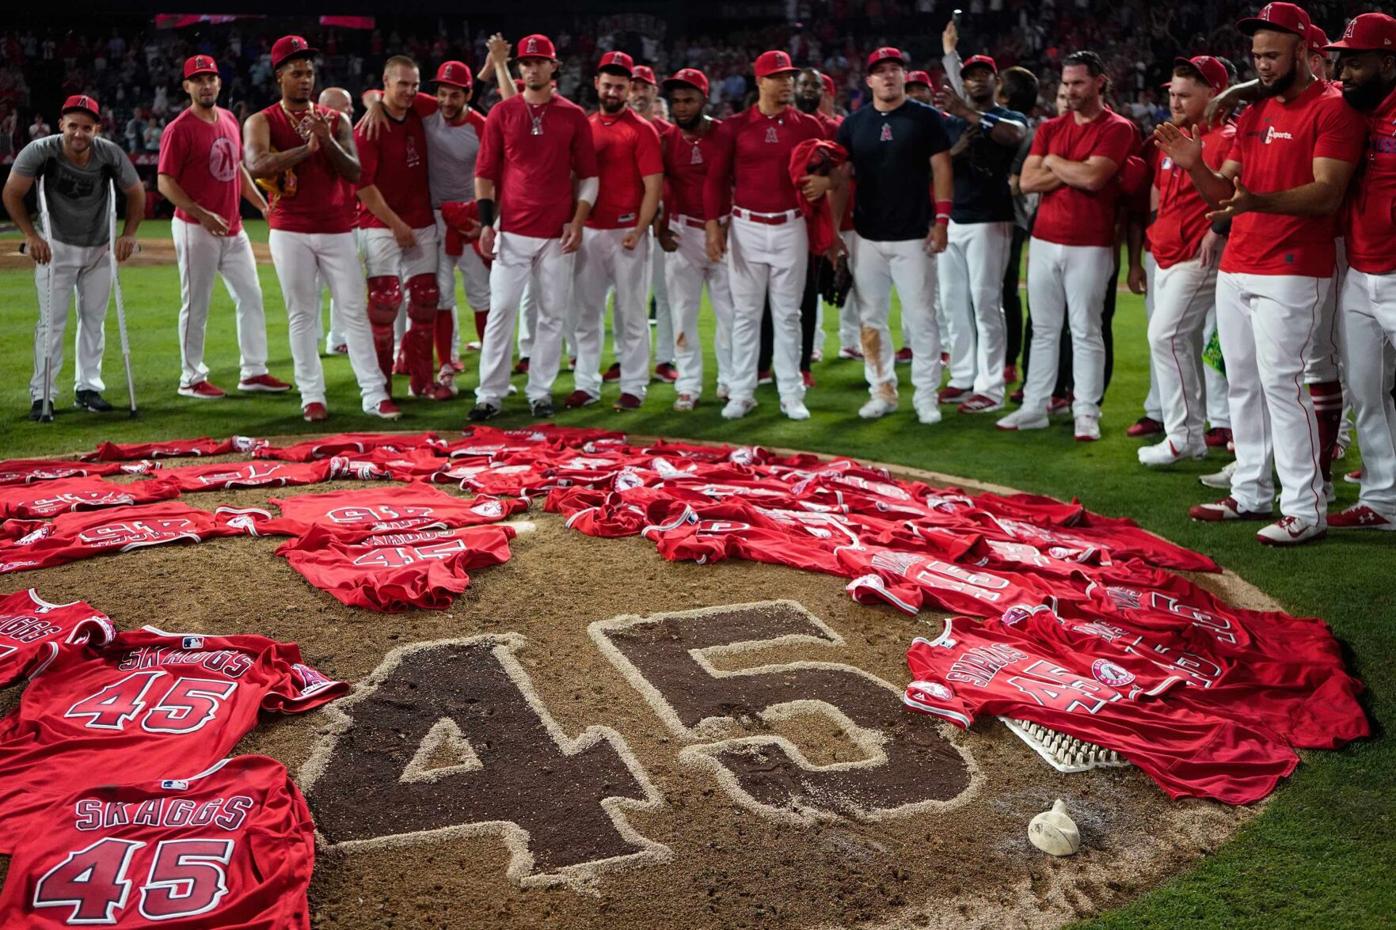 Tyler Skaggs' family sue Los Angeles Angels over pitcher's drug